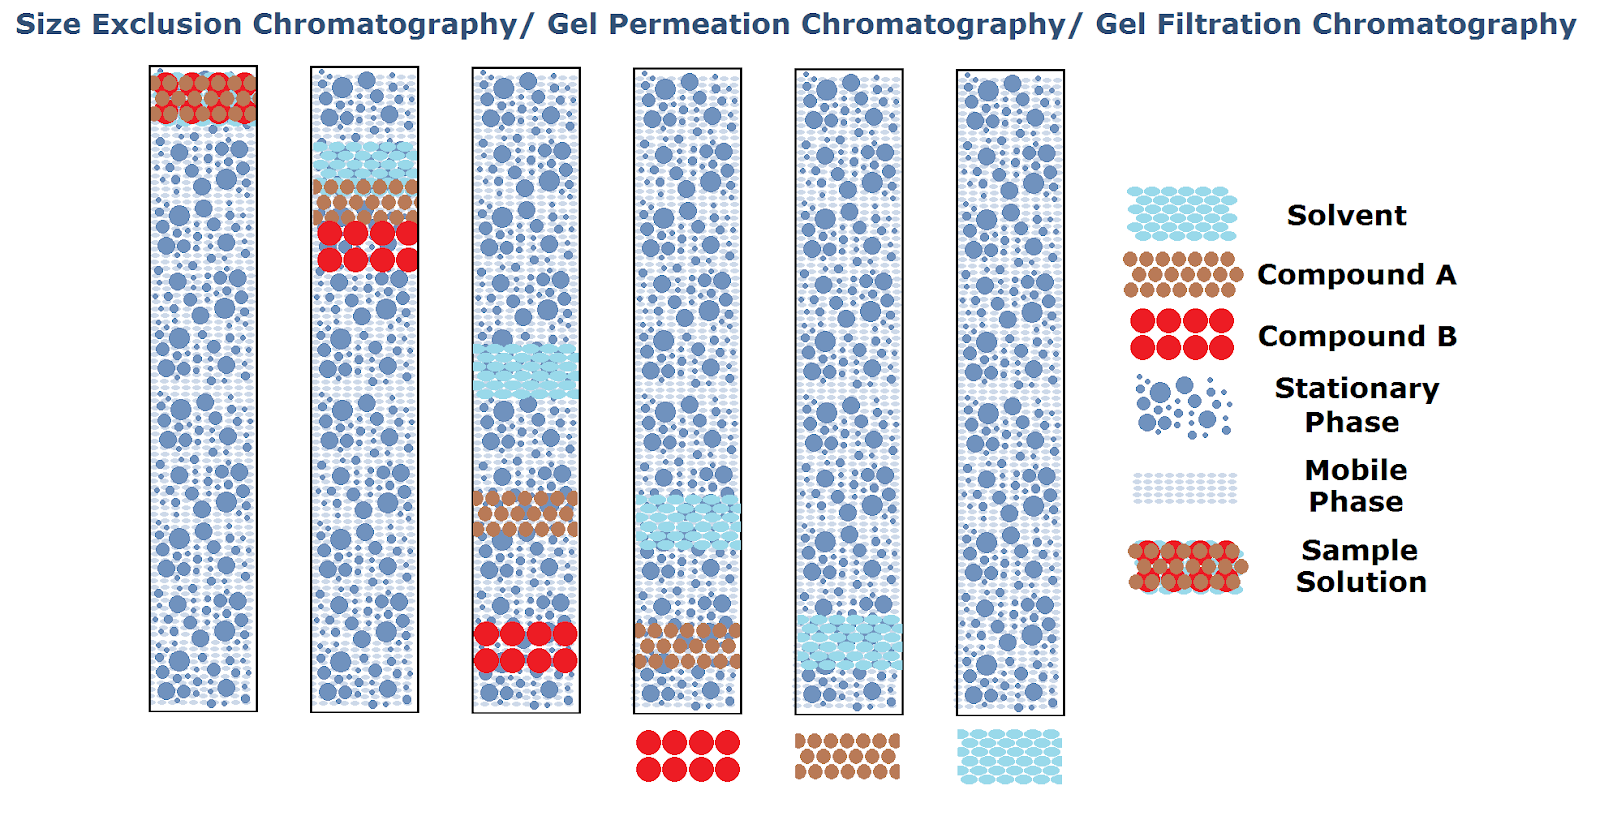 HPLC - Separations Based on Size or Size-Exclusion Chromatography or Gel-Permeation Chromatography